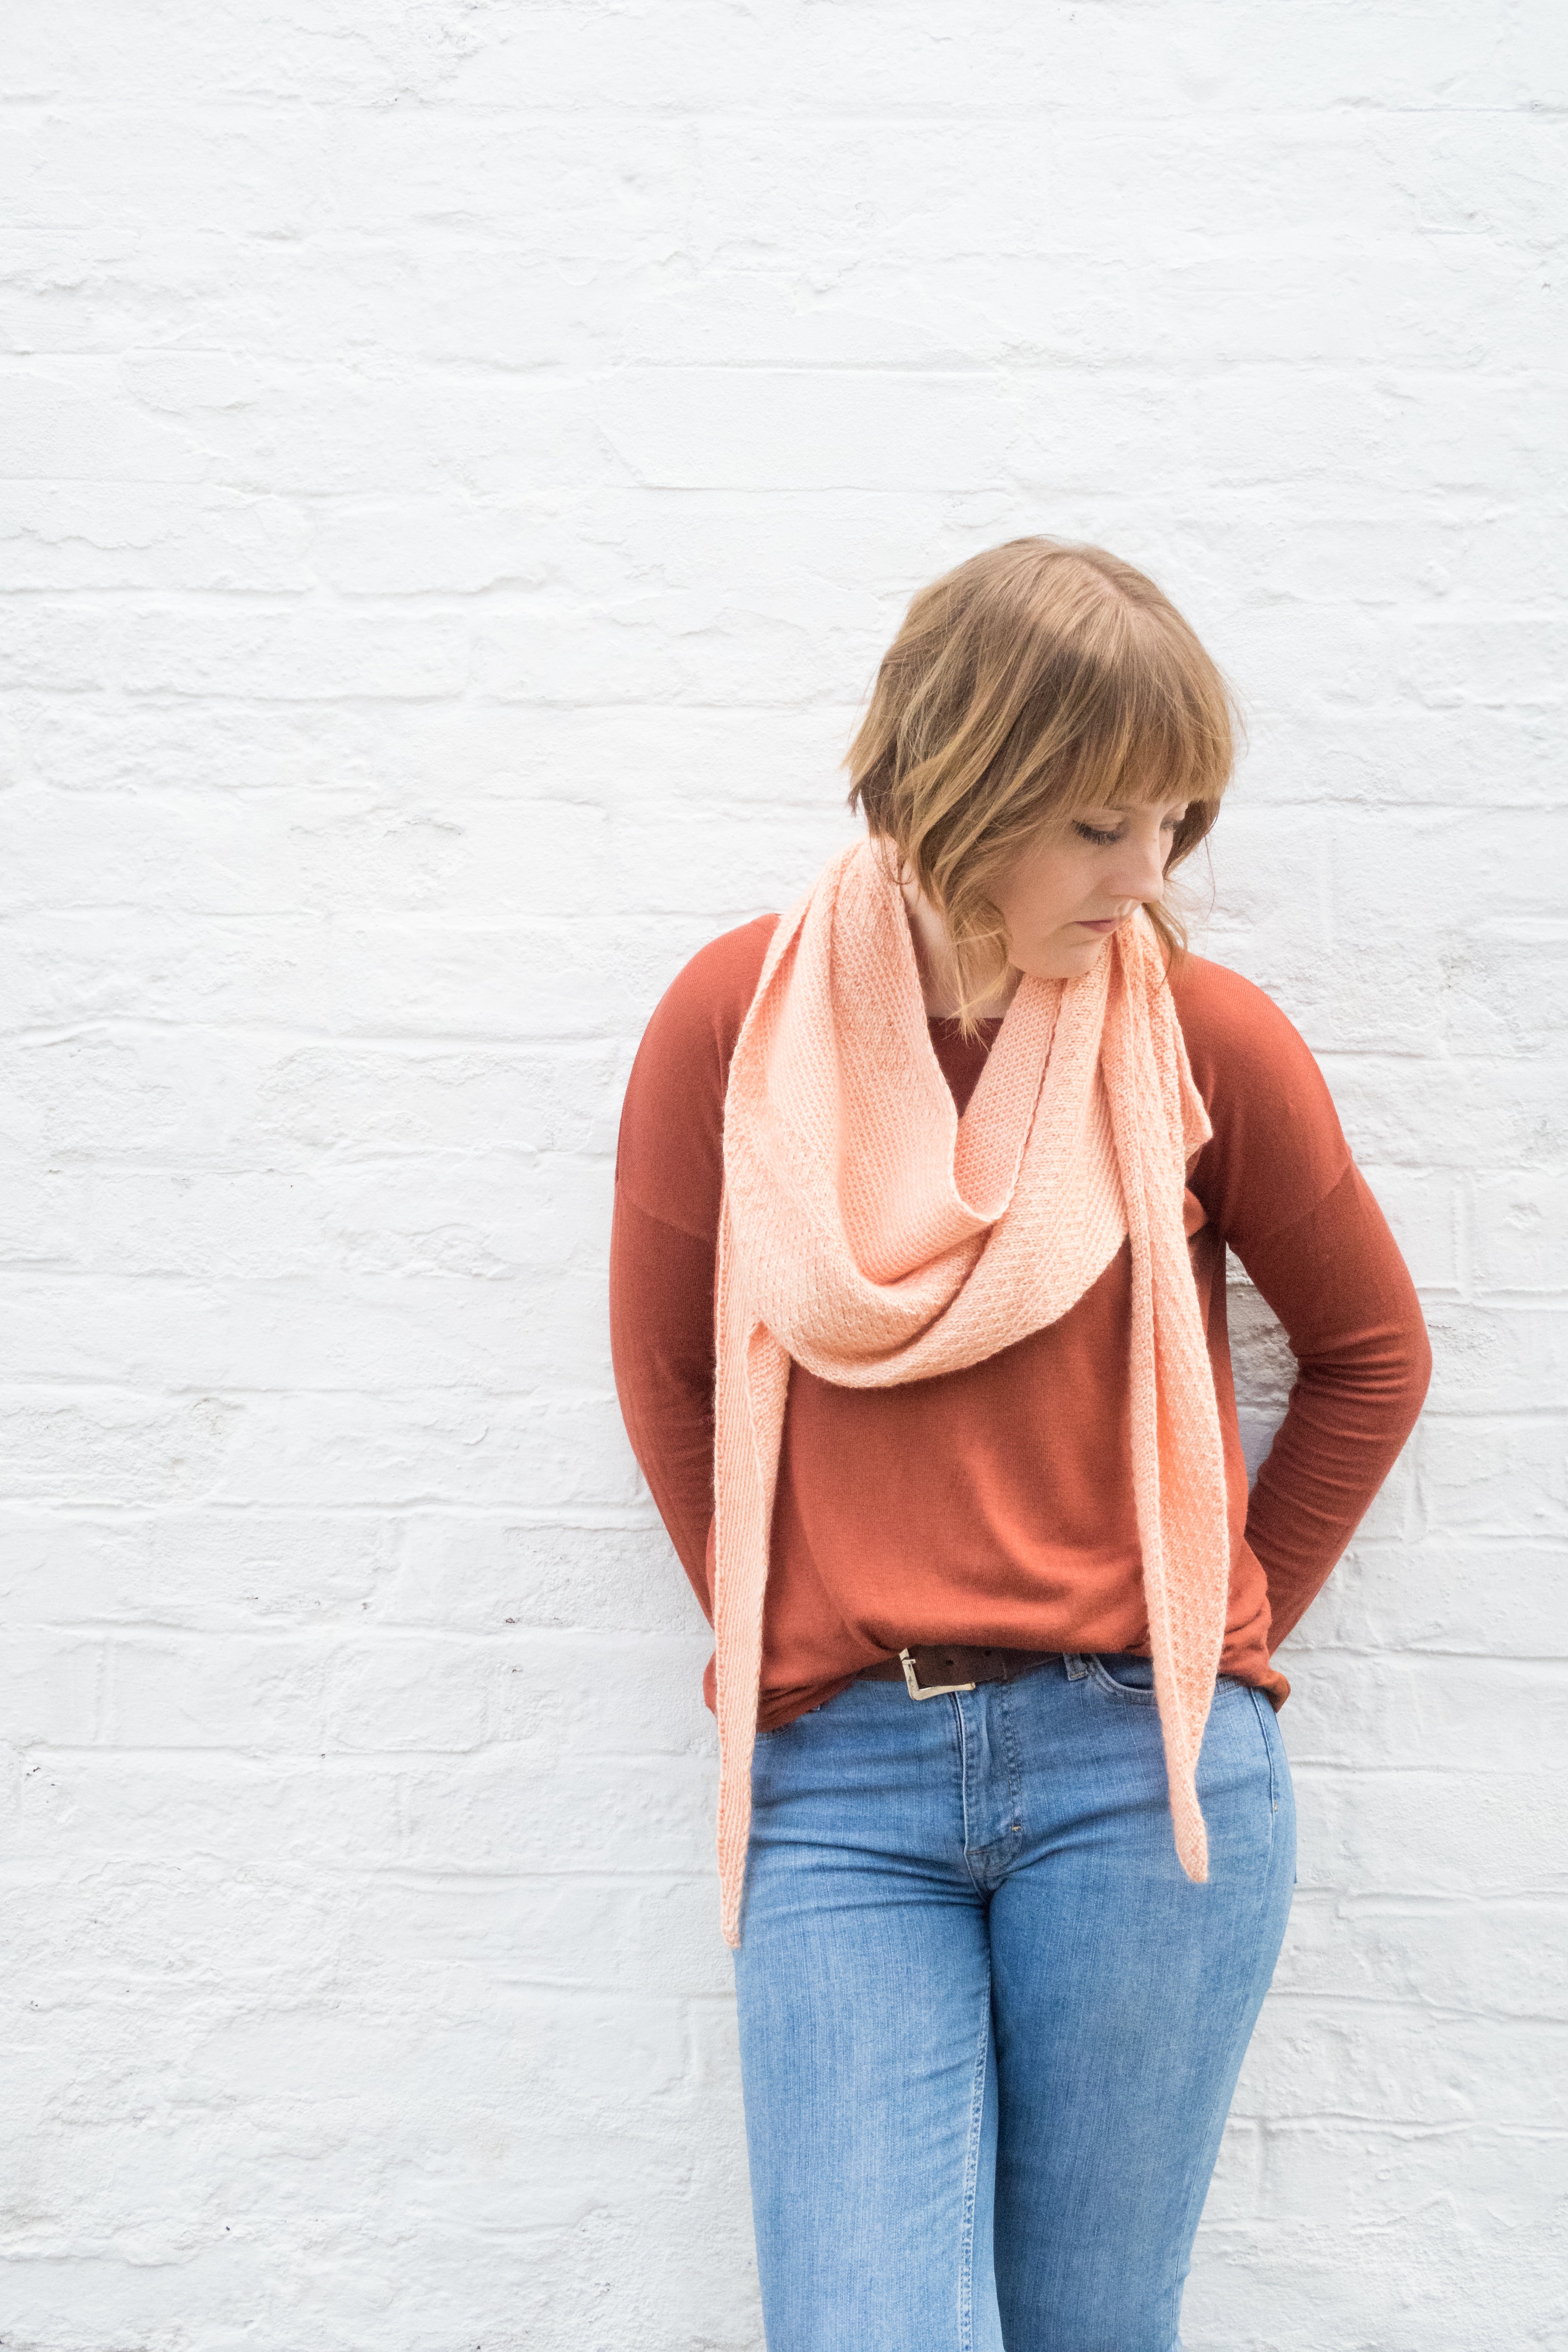 A person stood against a plain background wearing a peachy orange shawl wrapped around their shoulders